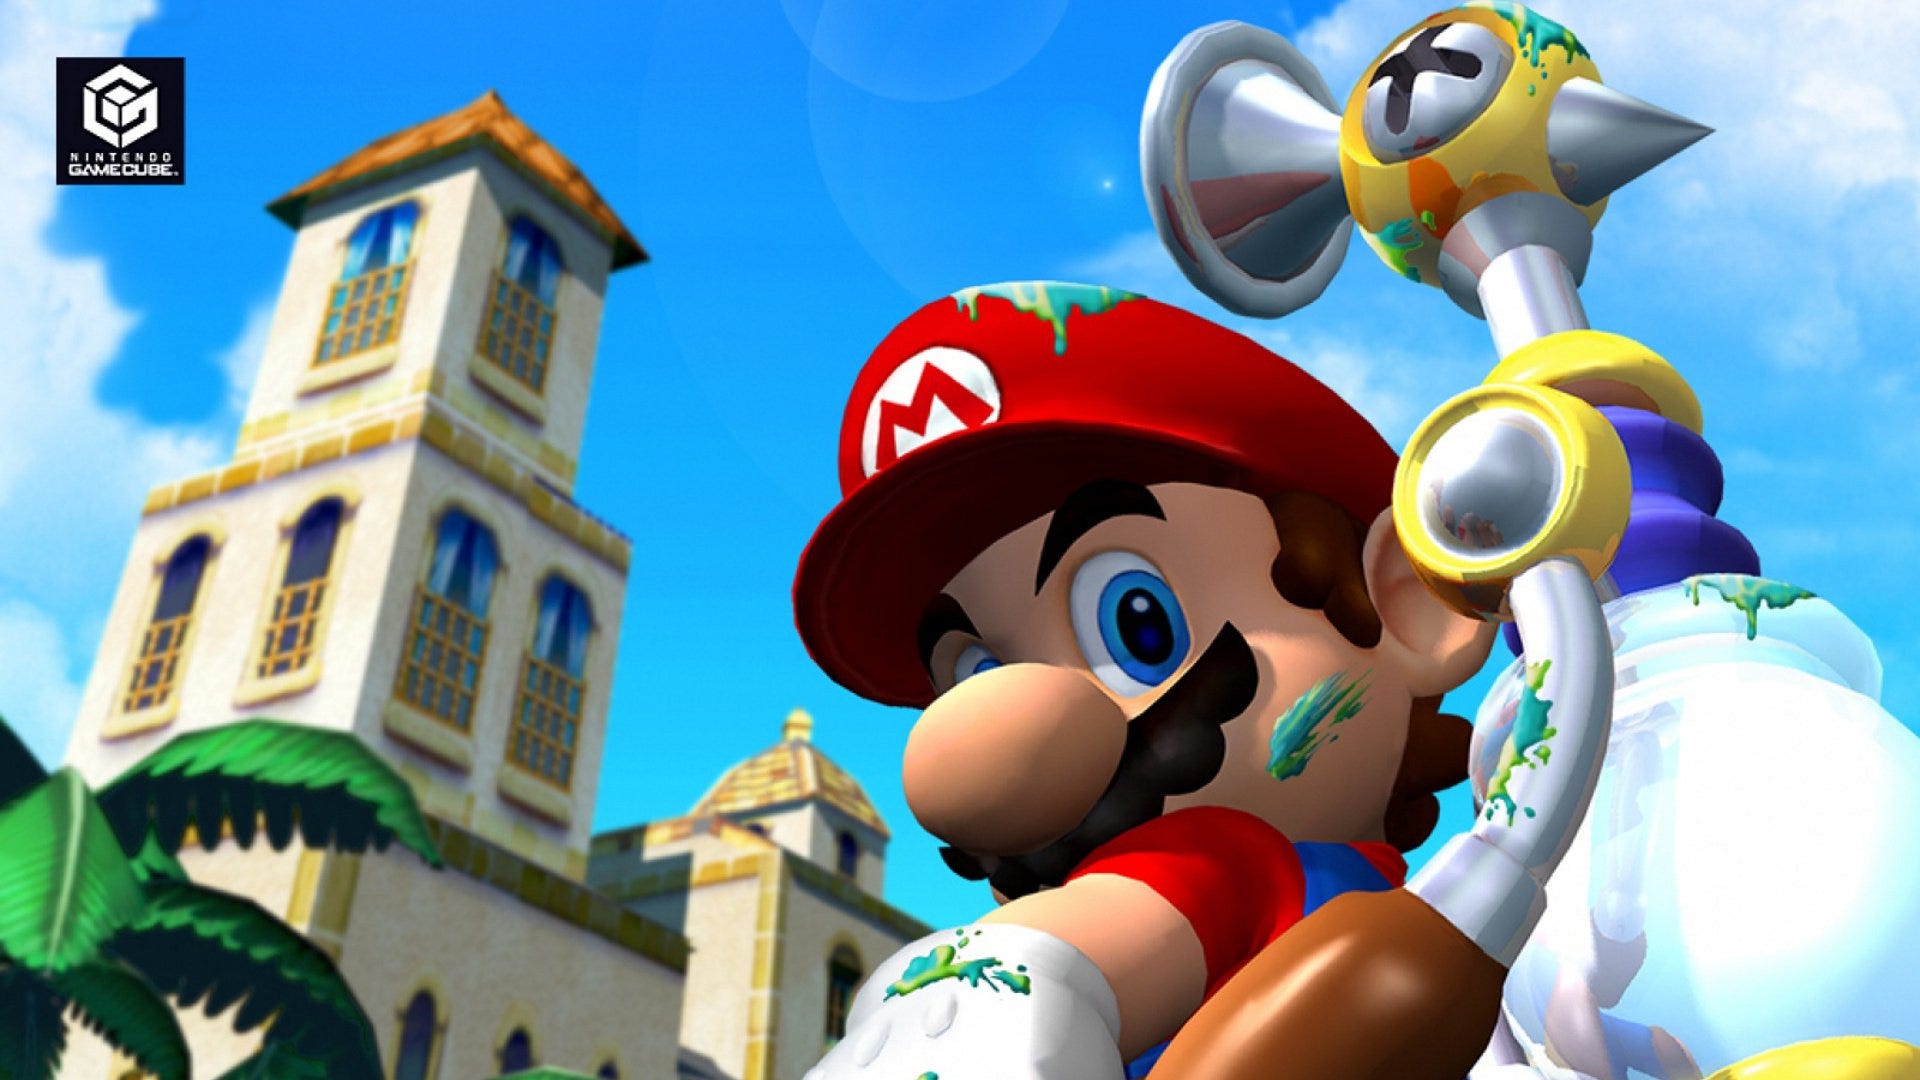 18 Years of Super Mario Sunshine. This article was originally released in…  | by Jake Theriault | SubpixelFilms.com | Medium